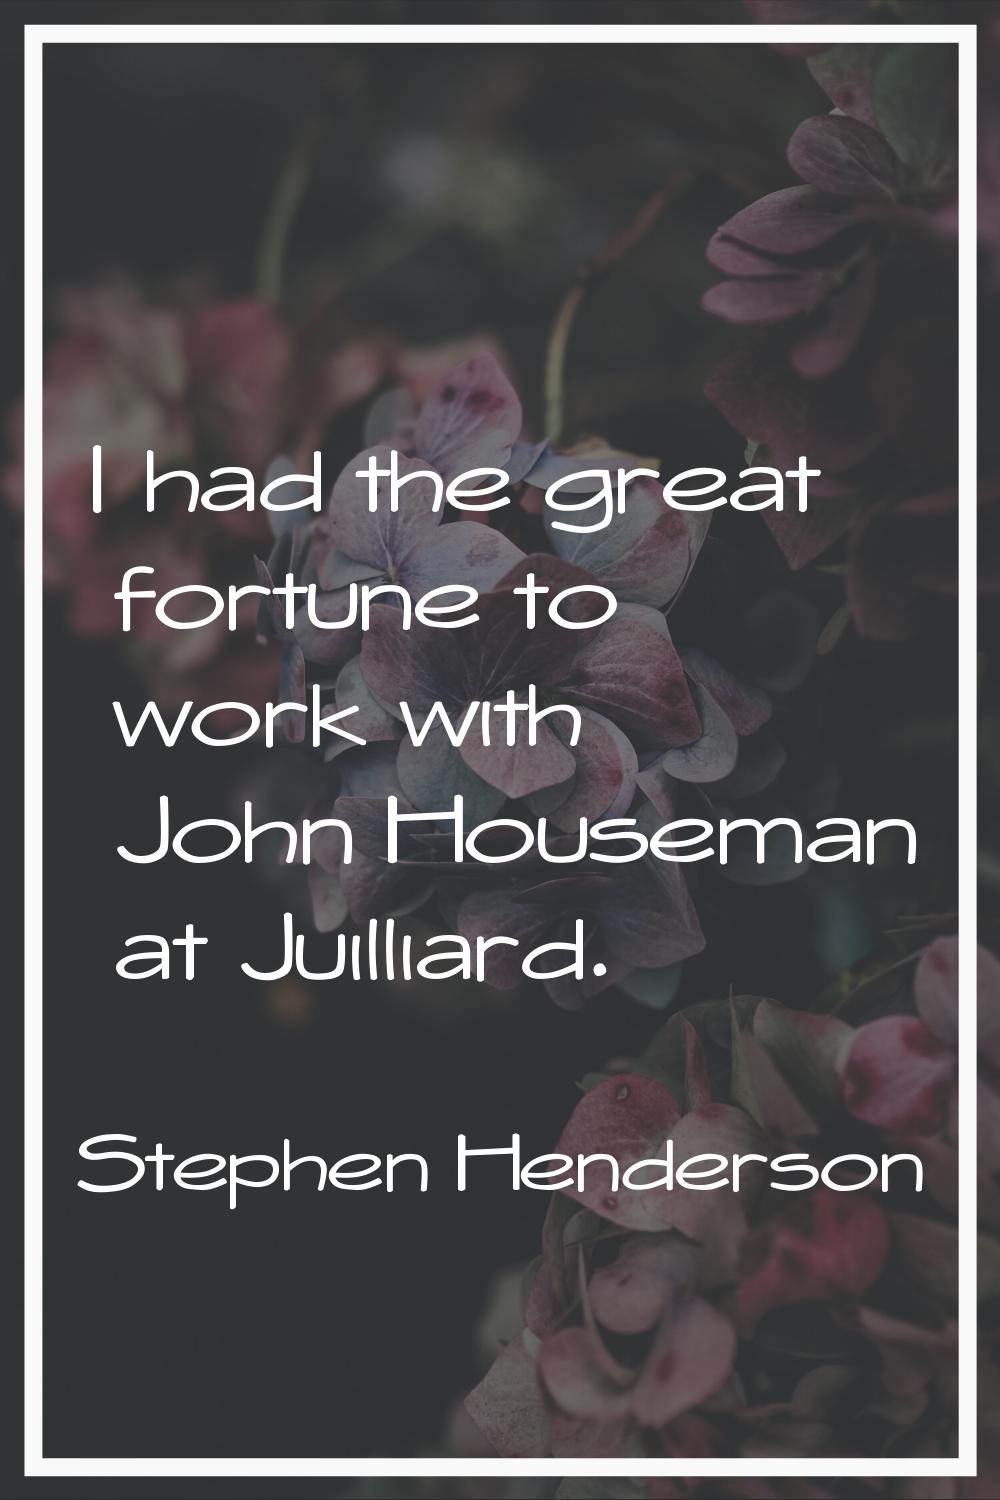 I had the great fortune to work with John Houseman at Juilliard.